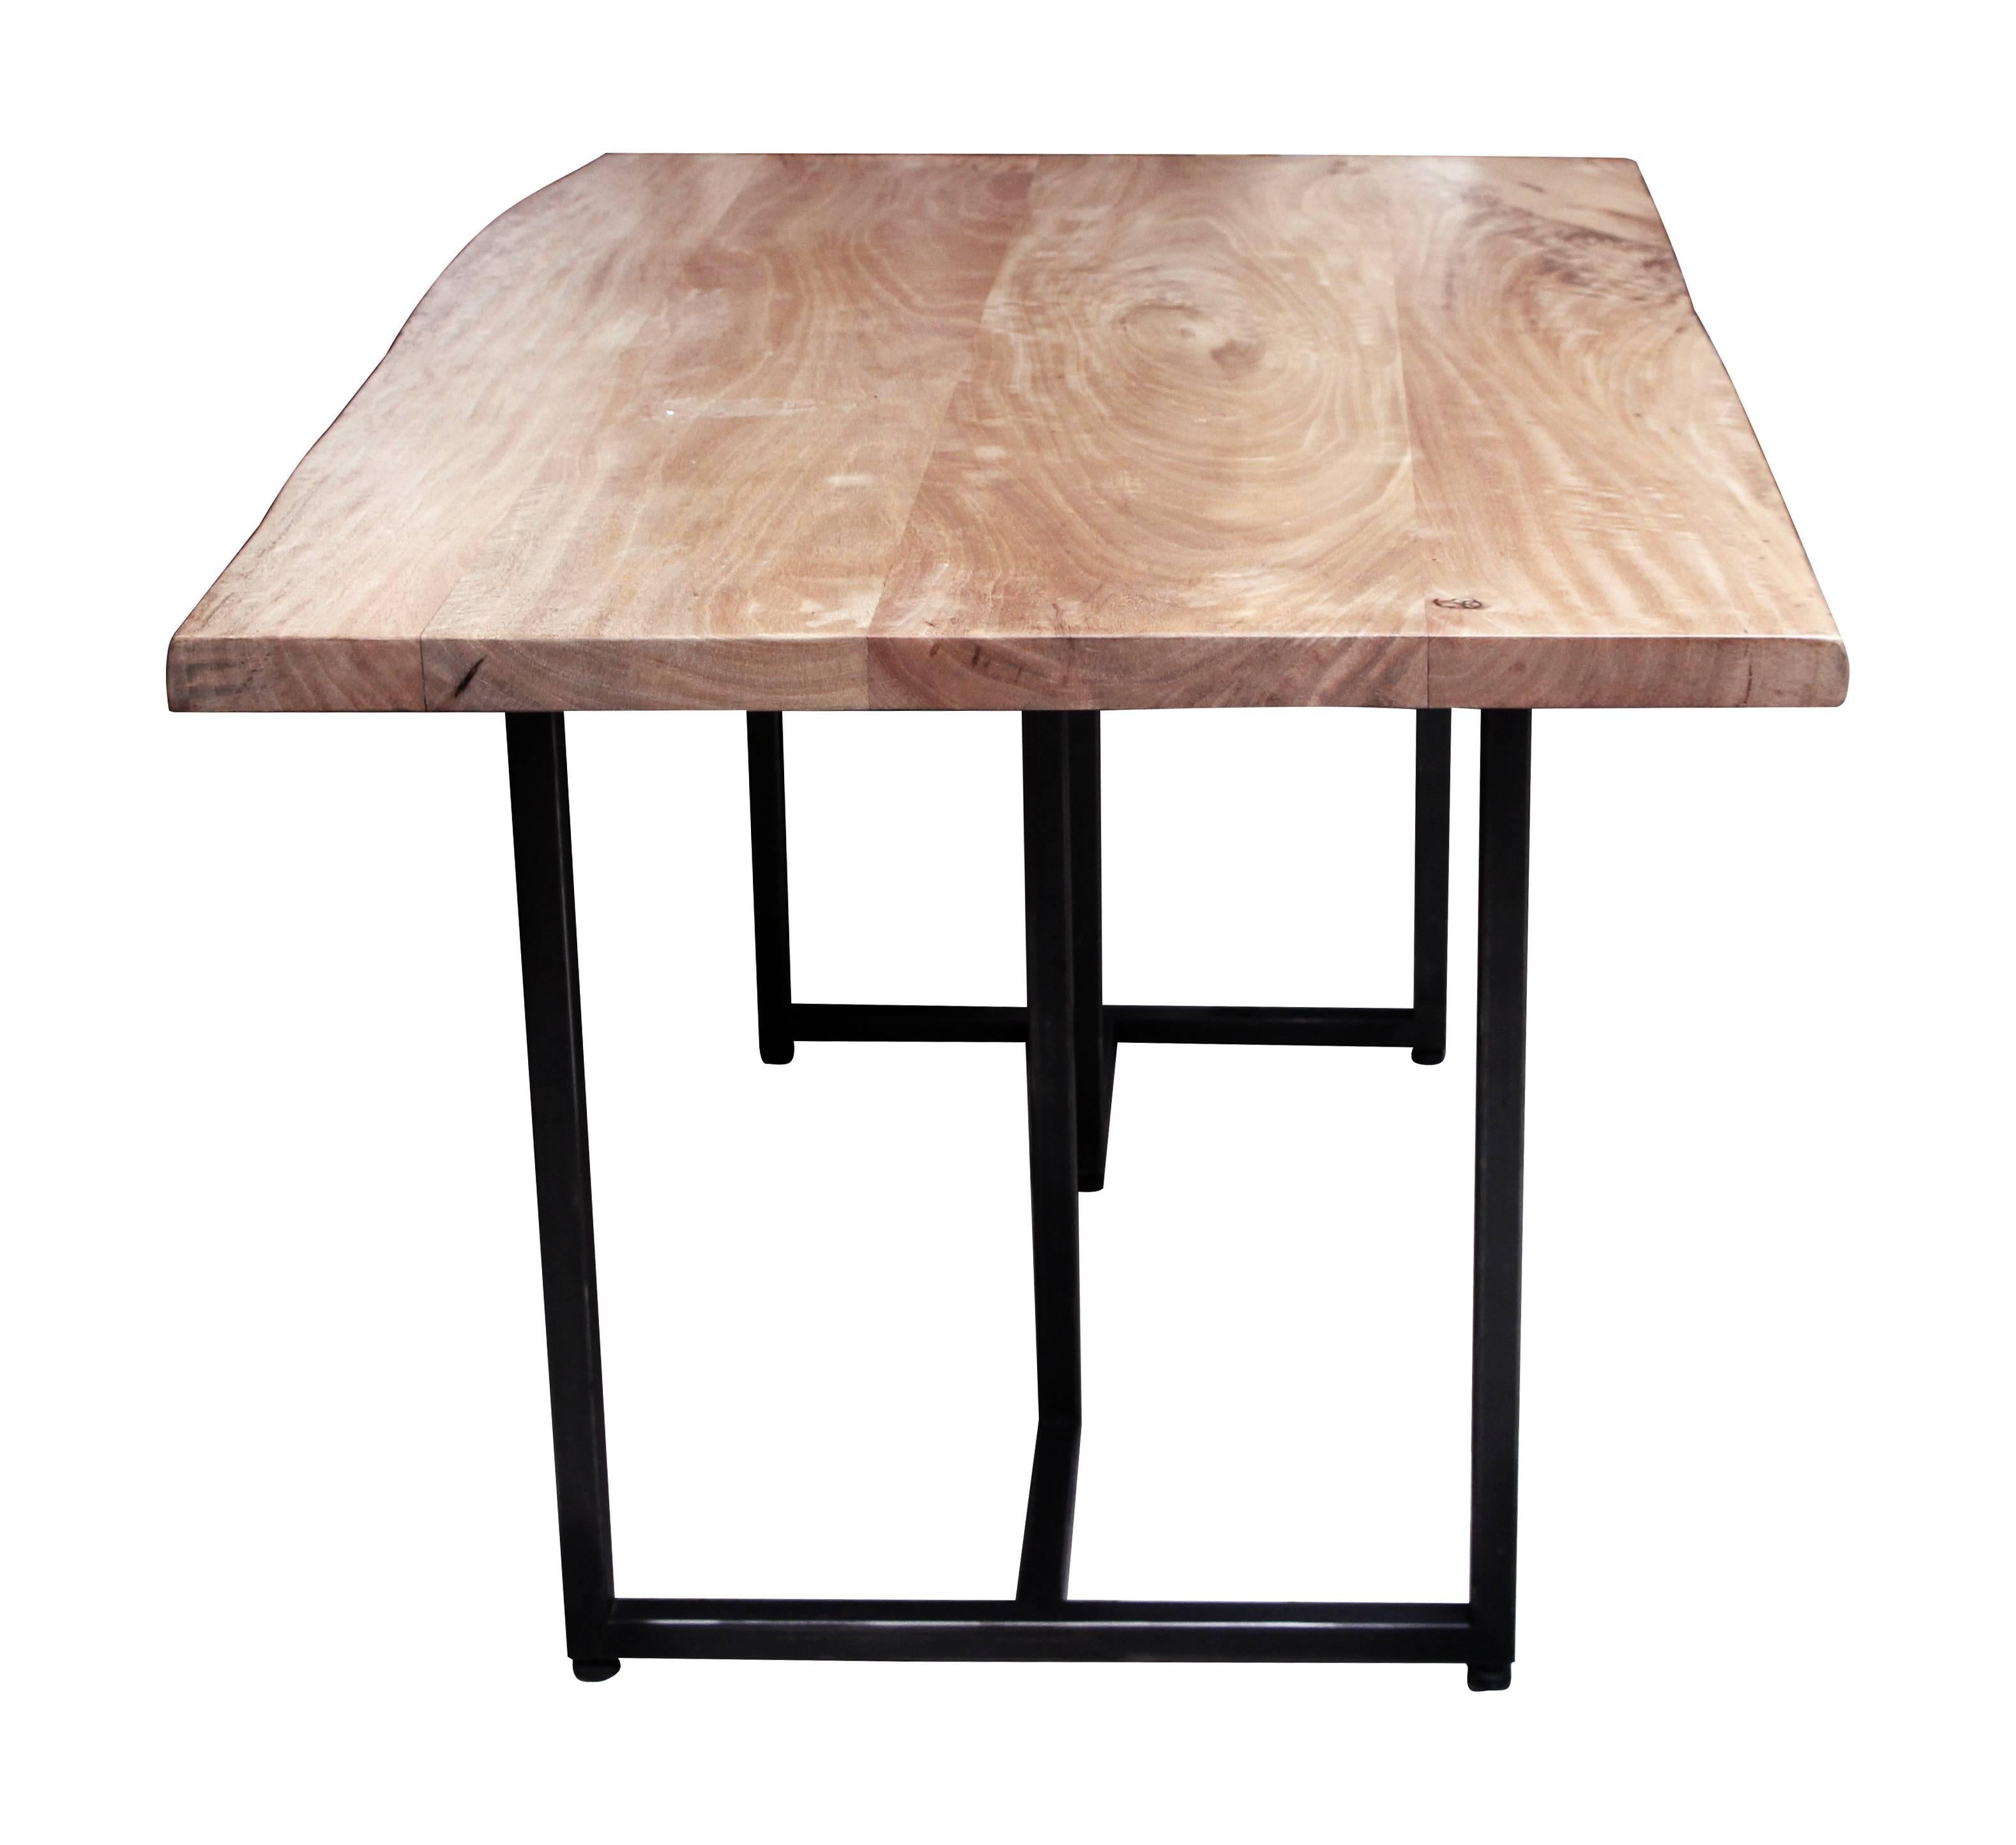 Live edge walnut table with Mid-Century Modern style black steel legs. We have several other leg styles to choose from. 
Please note each table is custom built and therefore each table varies slightly due to the natural grain of the wood. Other